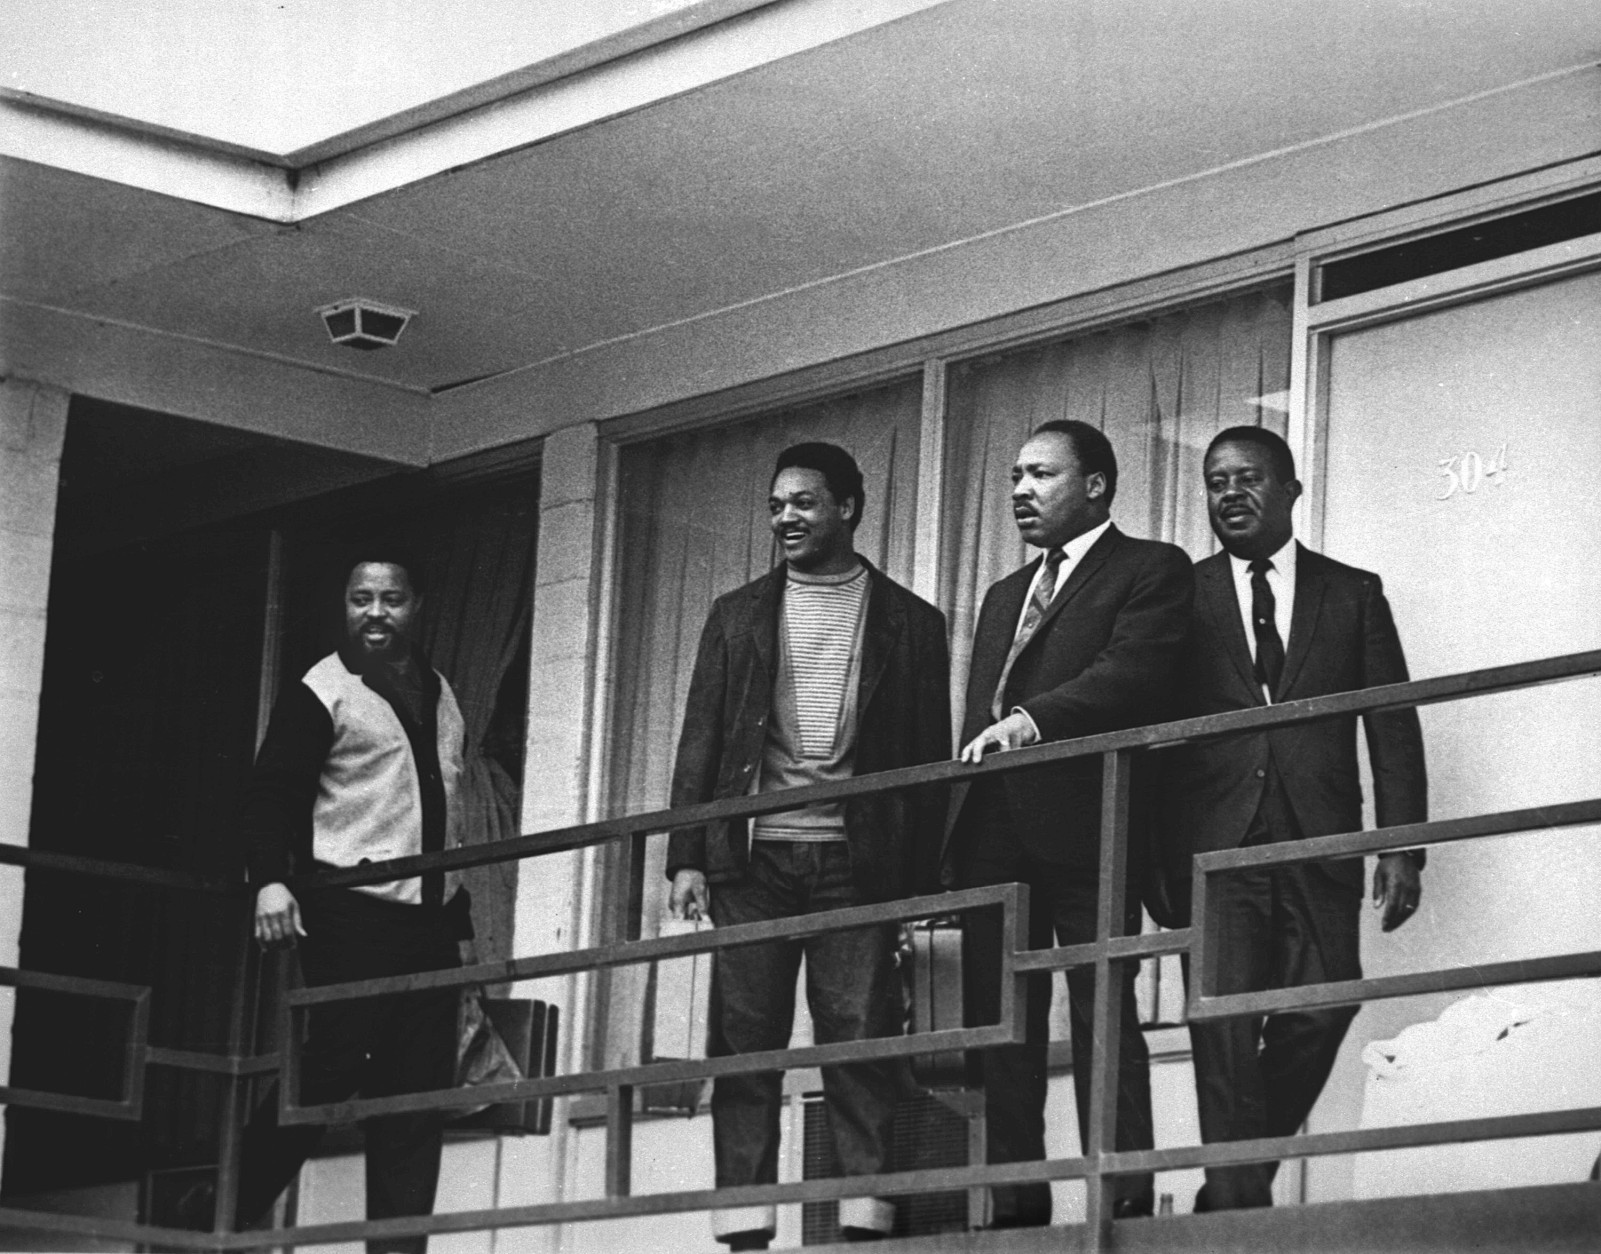 FILE - In this April 3, 1968 file photo, the Rev. Martin Luther King Jr. stands with other civil rights leaders on the balcony of the Lorraine Motel in Memphis, Tenn., a day before he was assassinated at approximately the same place. From left are Hosea Williams, Jesse Jackson, King, and Ralph Abernathy. King is one of America's most famous victims of gun violence. Just as guns were a complicated issue for King in his lifetime, they loom large over the 30th anniversary of the holiday honoring his birthday. (AP Photo, File)